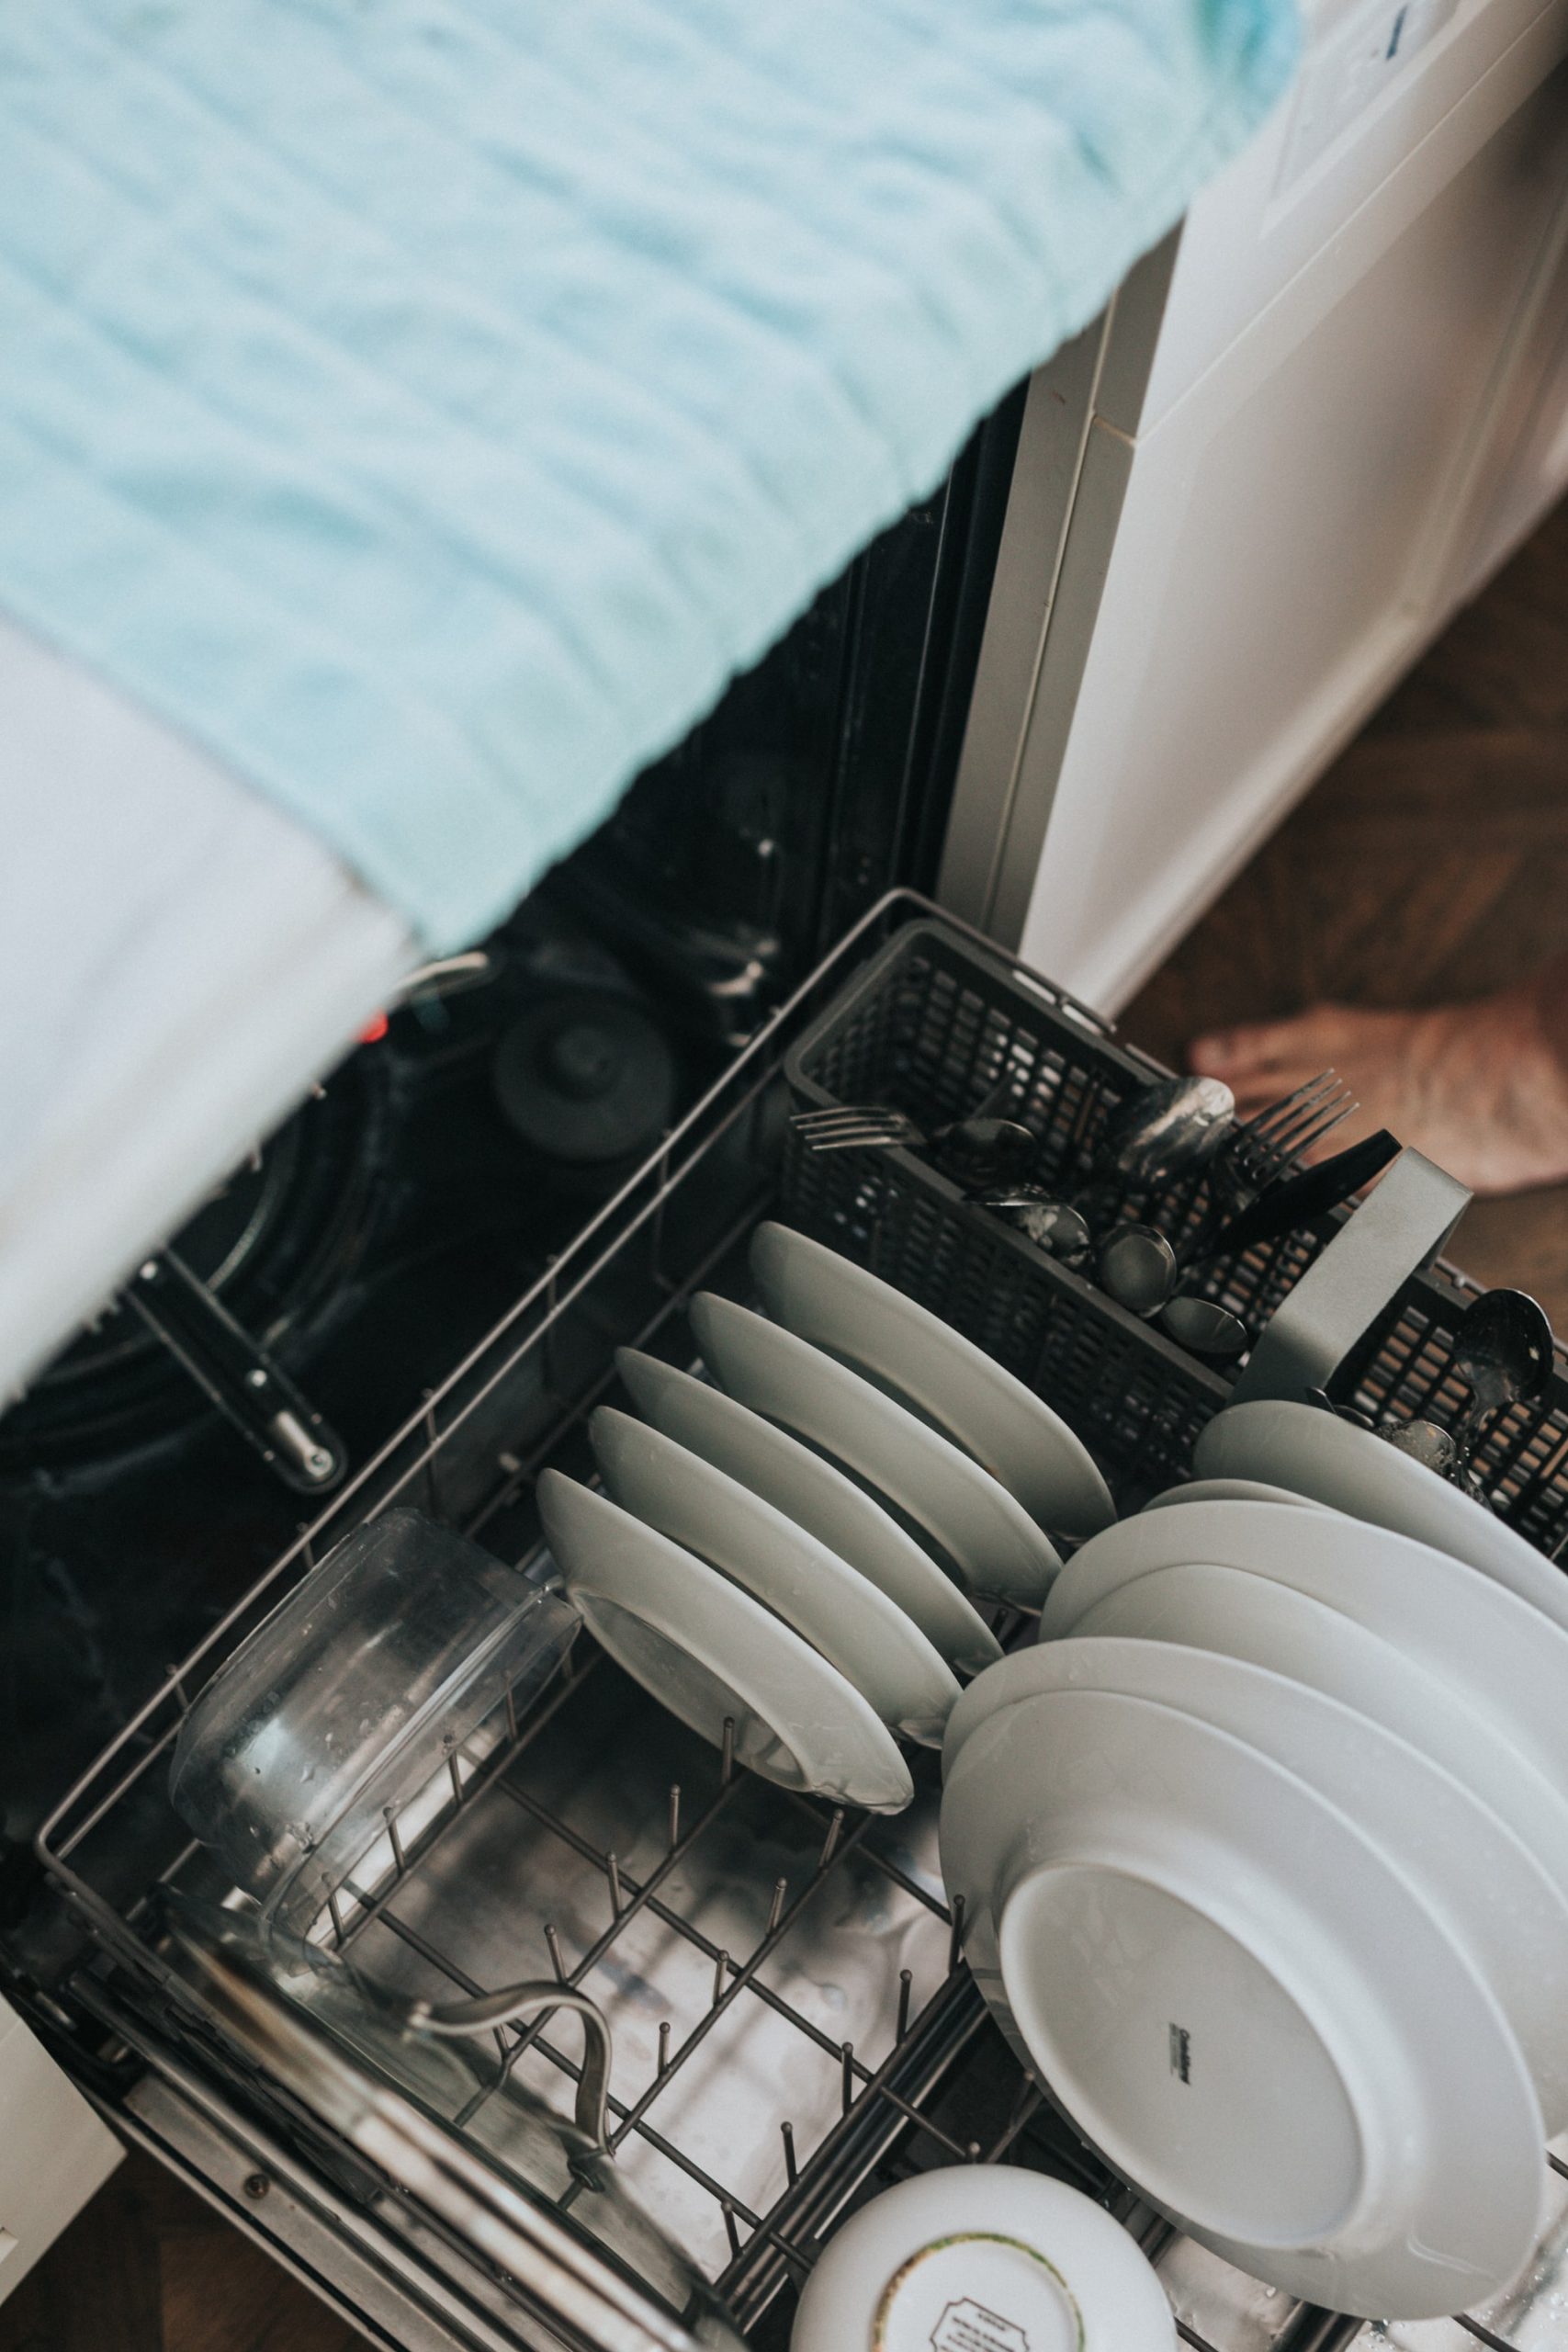 Appliance Maintenance Tips and Tricks to Make Life Easier